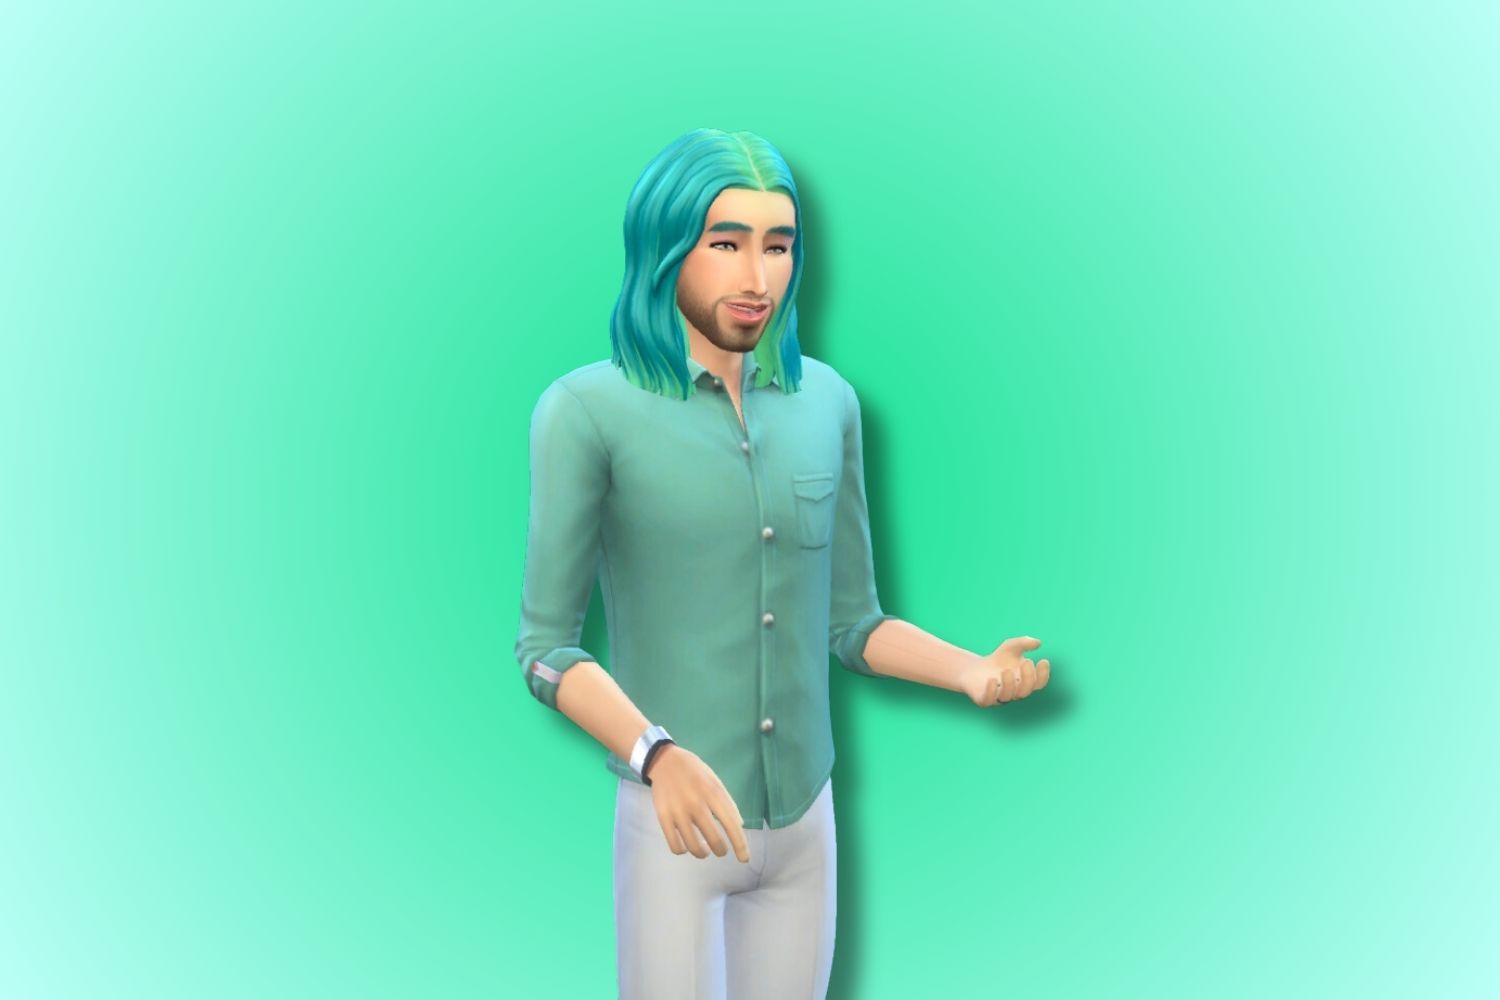 An androgynous adult Sim wears an all mint ensemble while standing against a mint-colored background.